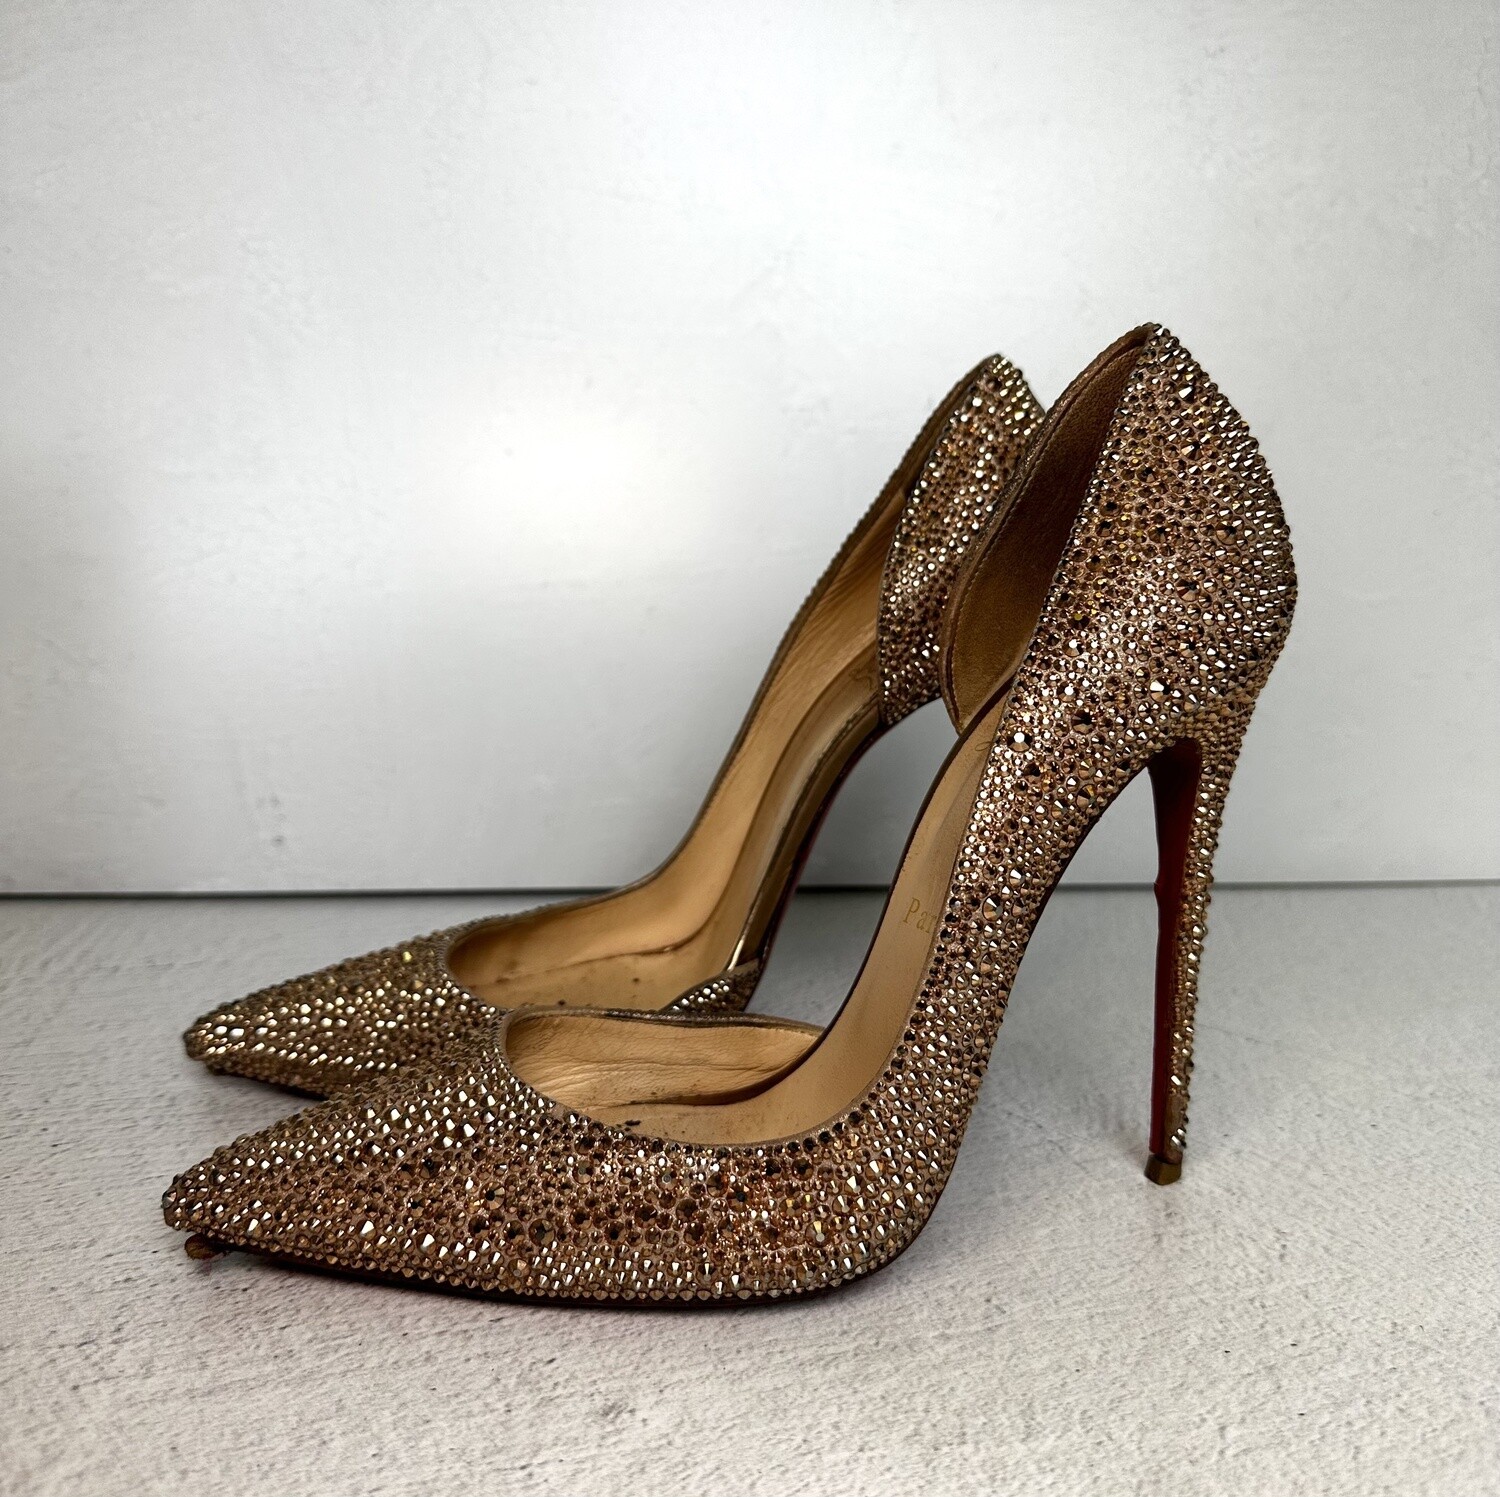 Christian Louboutin Pumps, Gold Studded D'Orsay Heels, Size 39.5, Preowned  in Dustbag, CMA01 - Julia Rose Boston | Shop